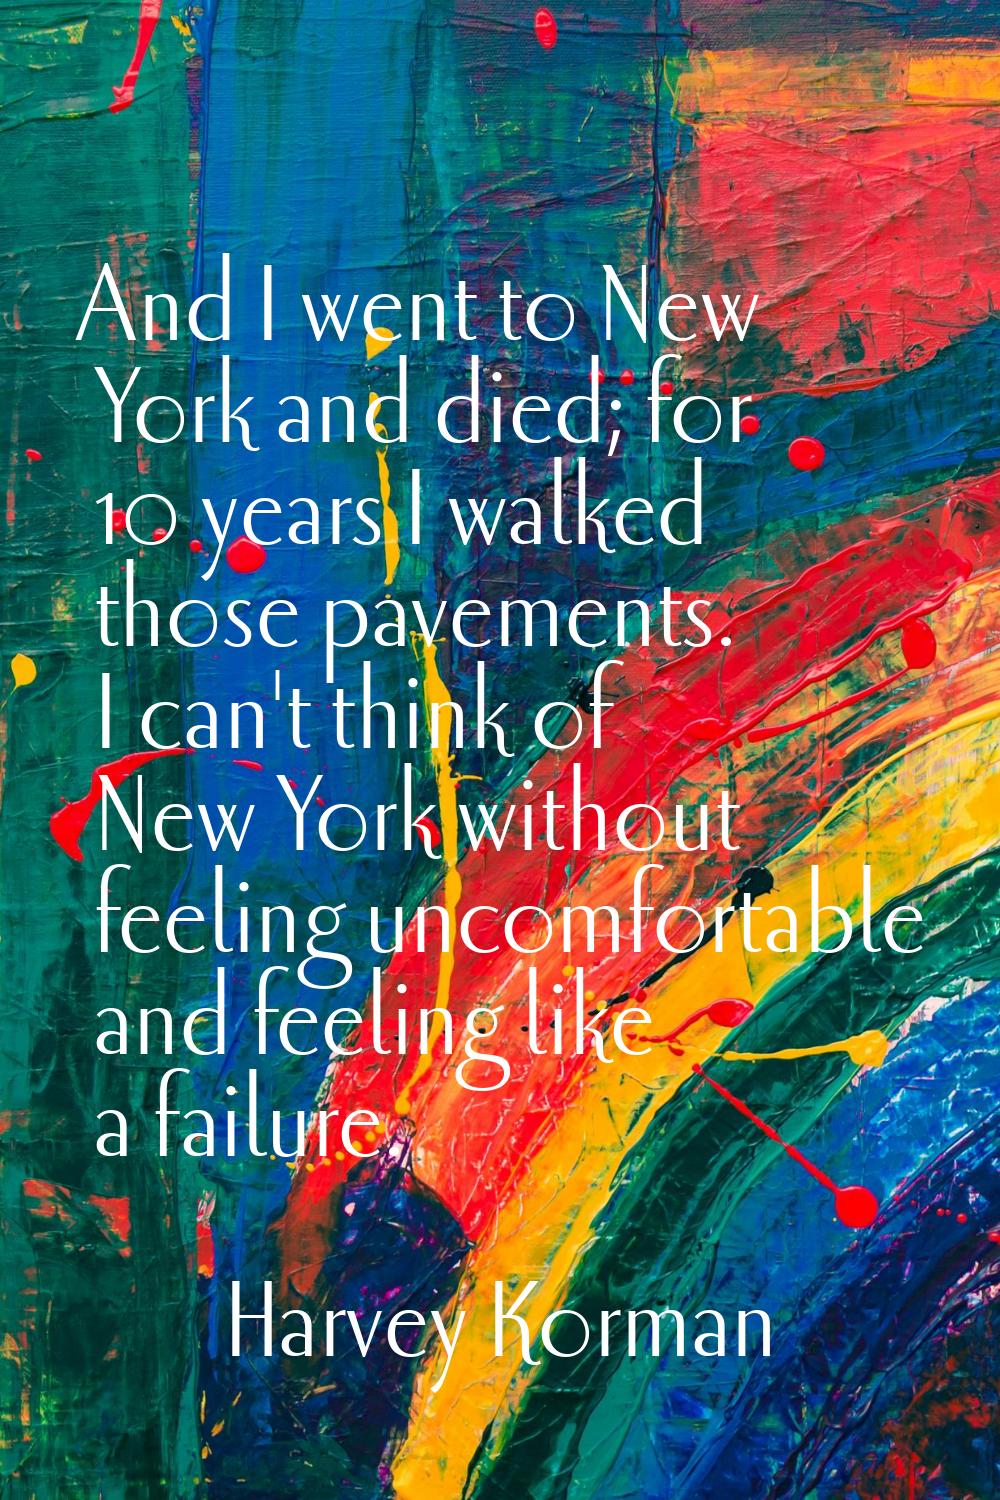 And I went to New York and died; for 10 years I walked those pavements. I can't think of New York w